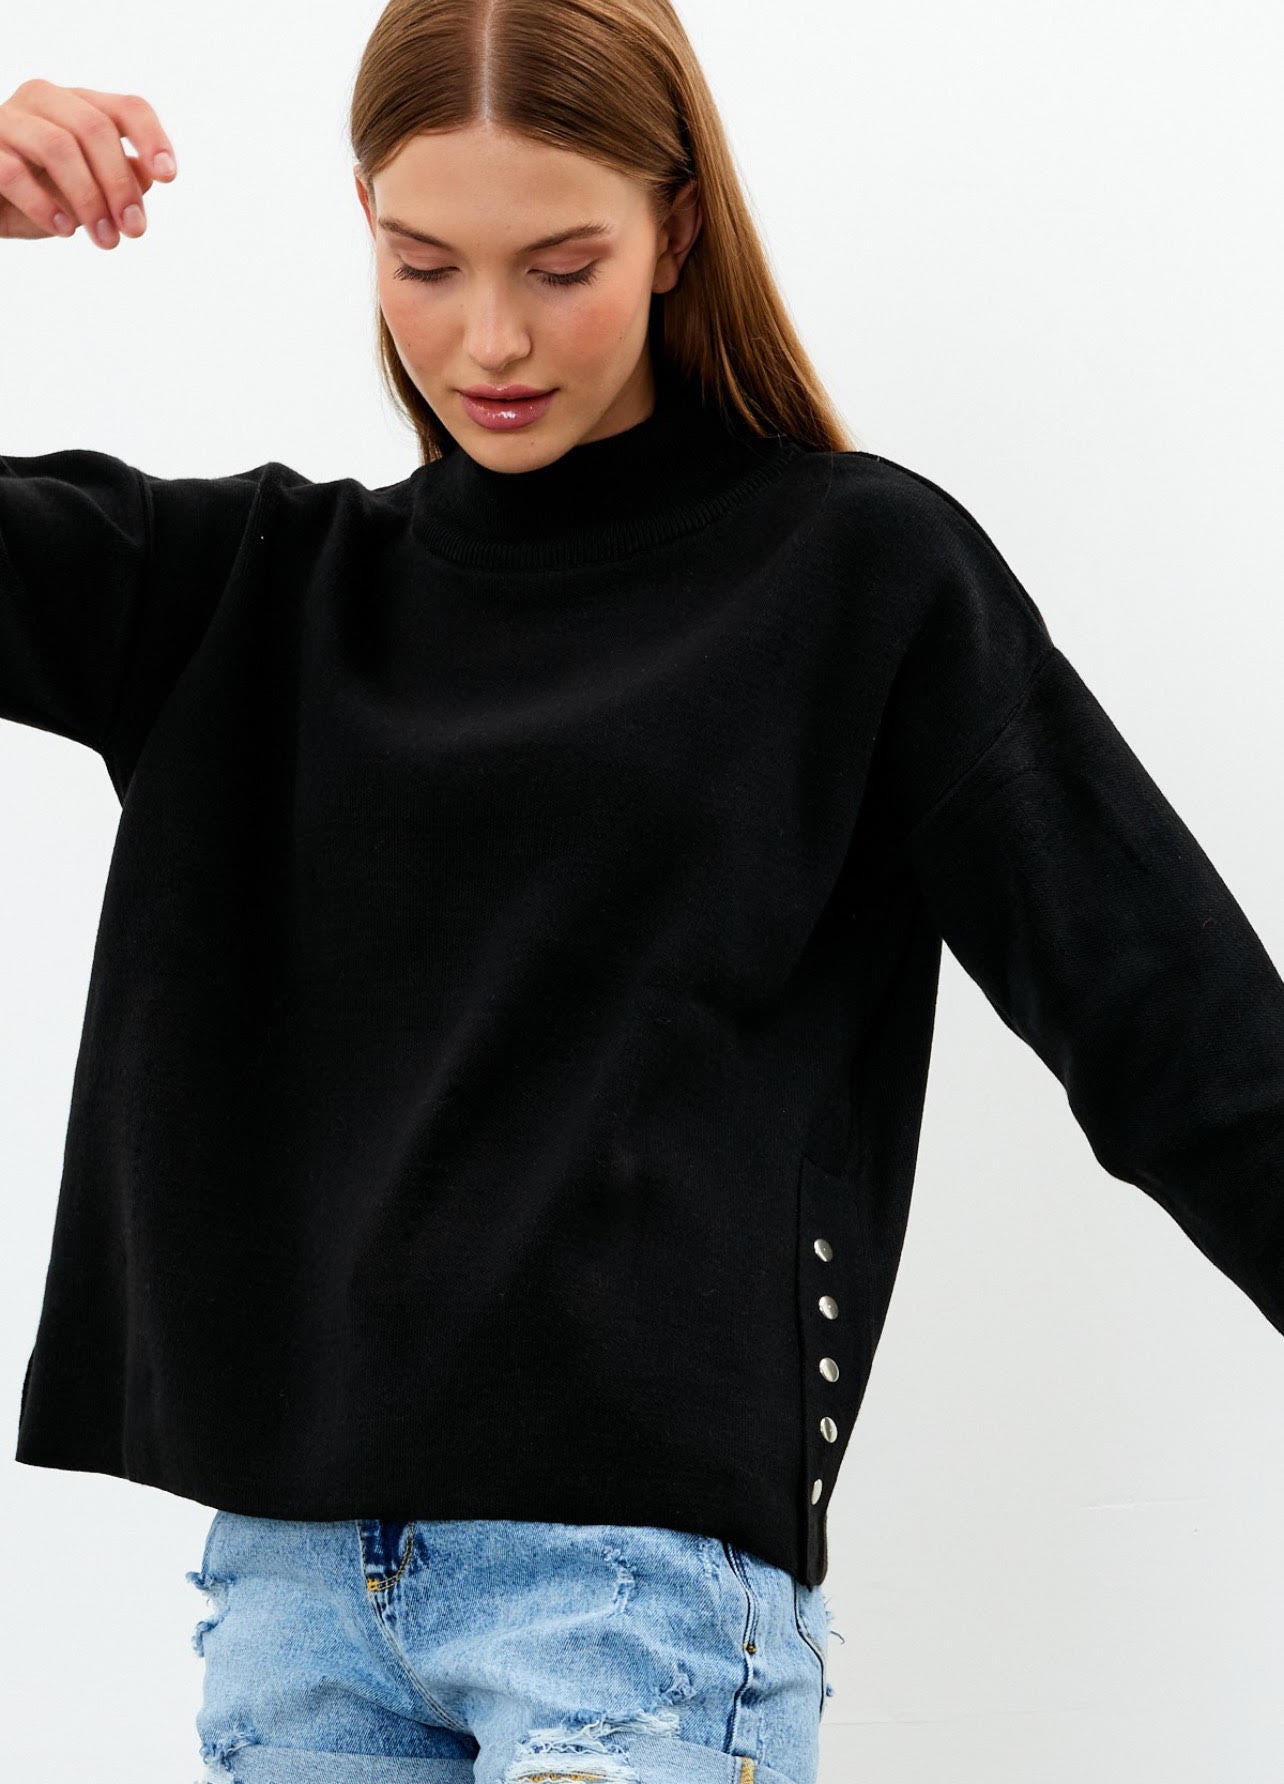 Mock Neck Knit One Size Misses Sweater